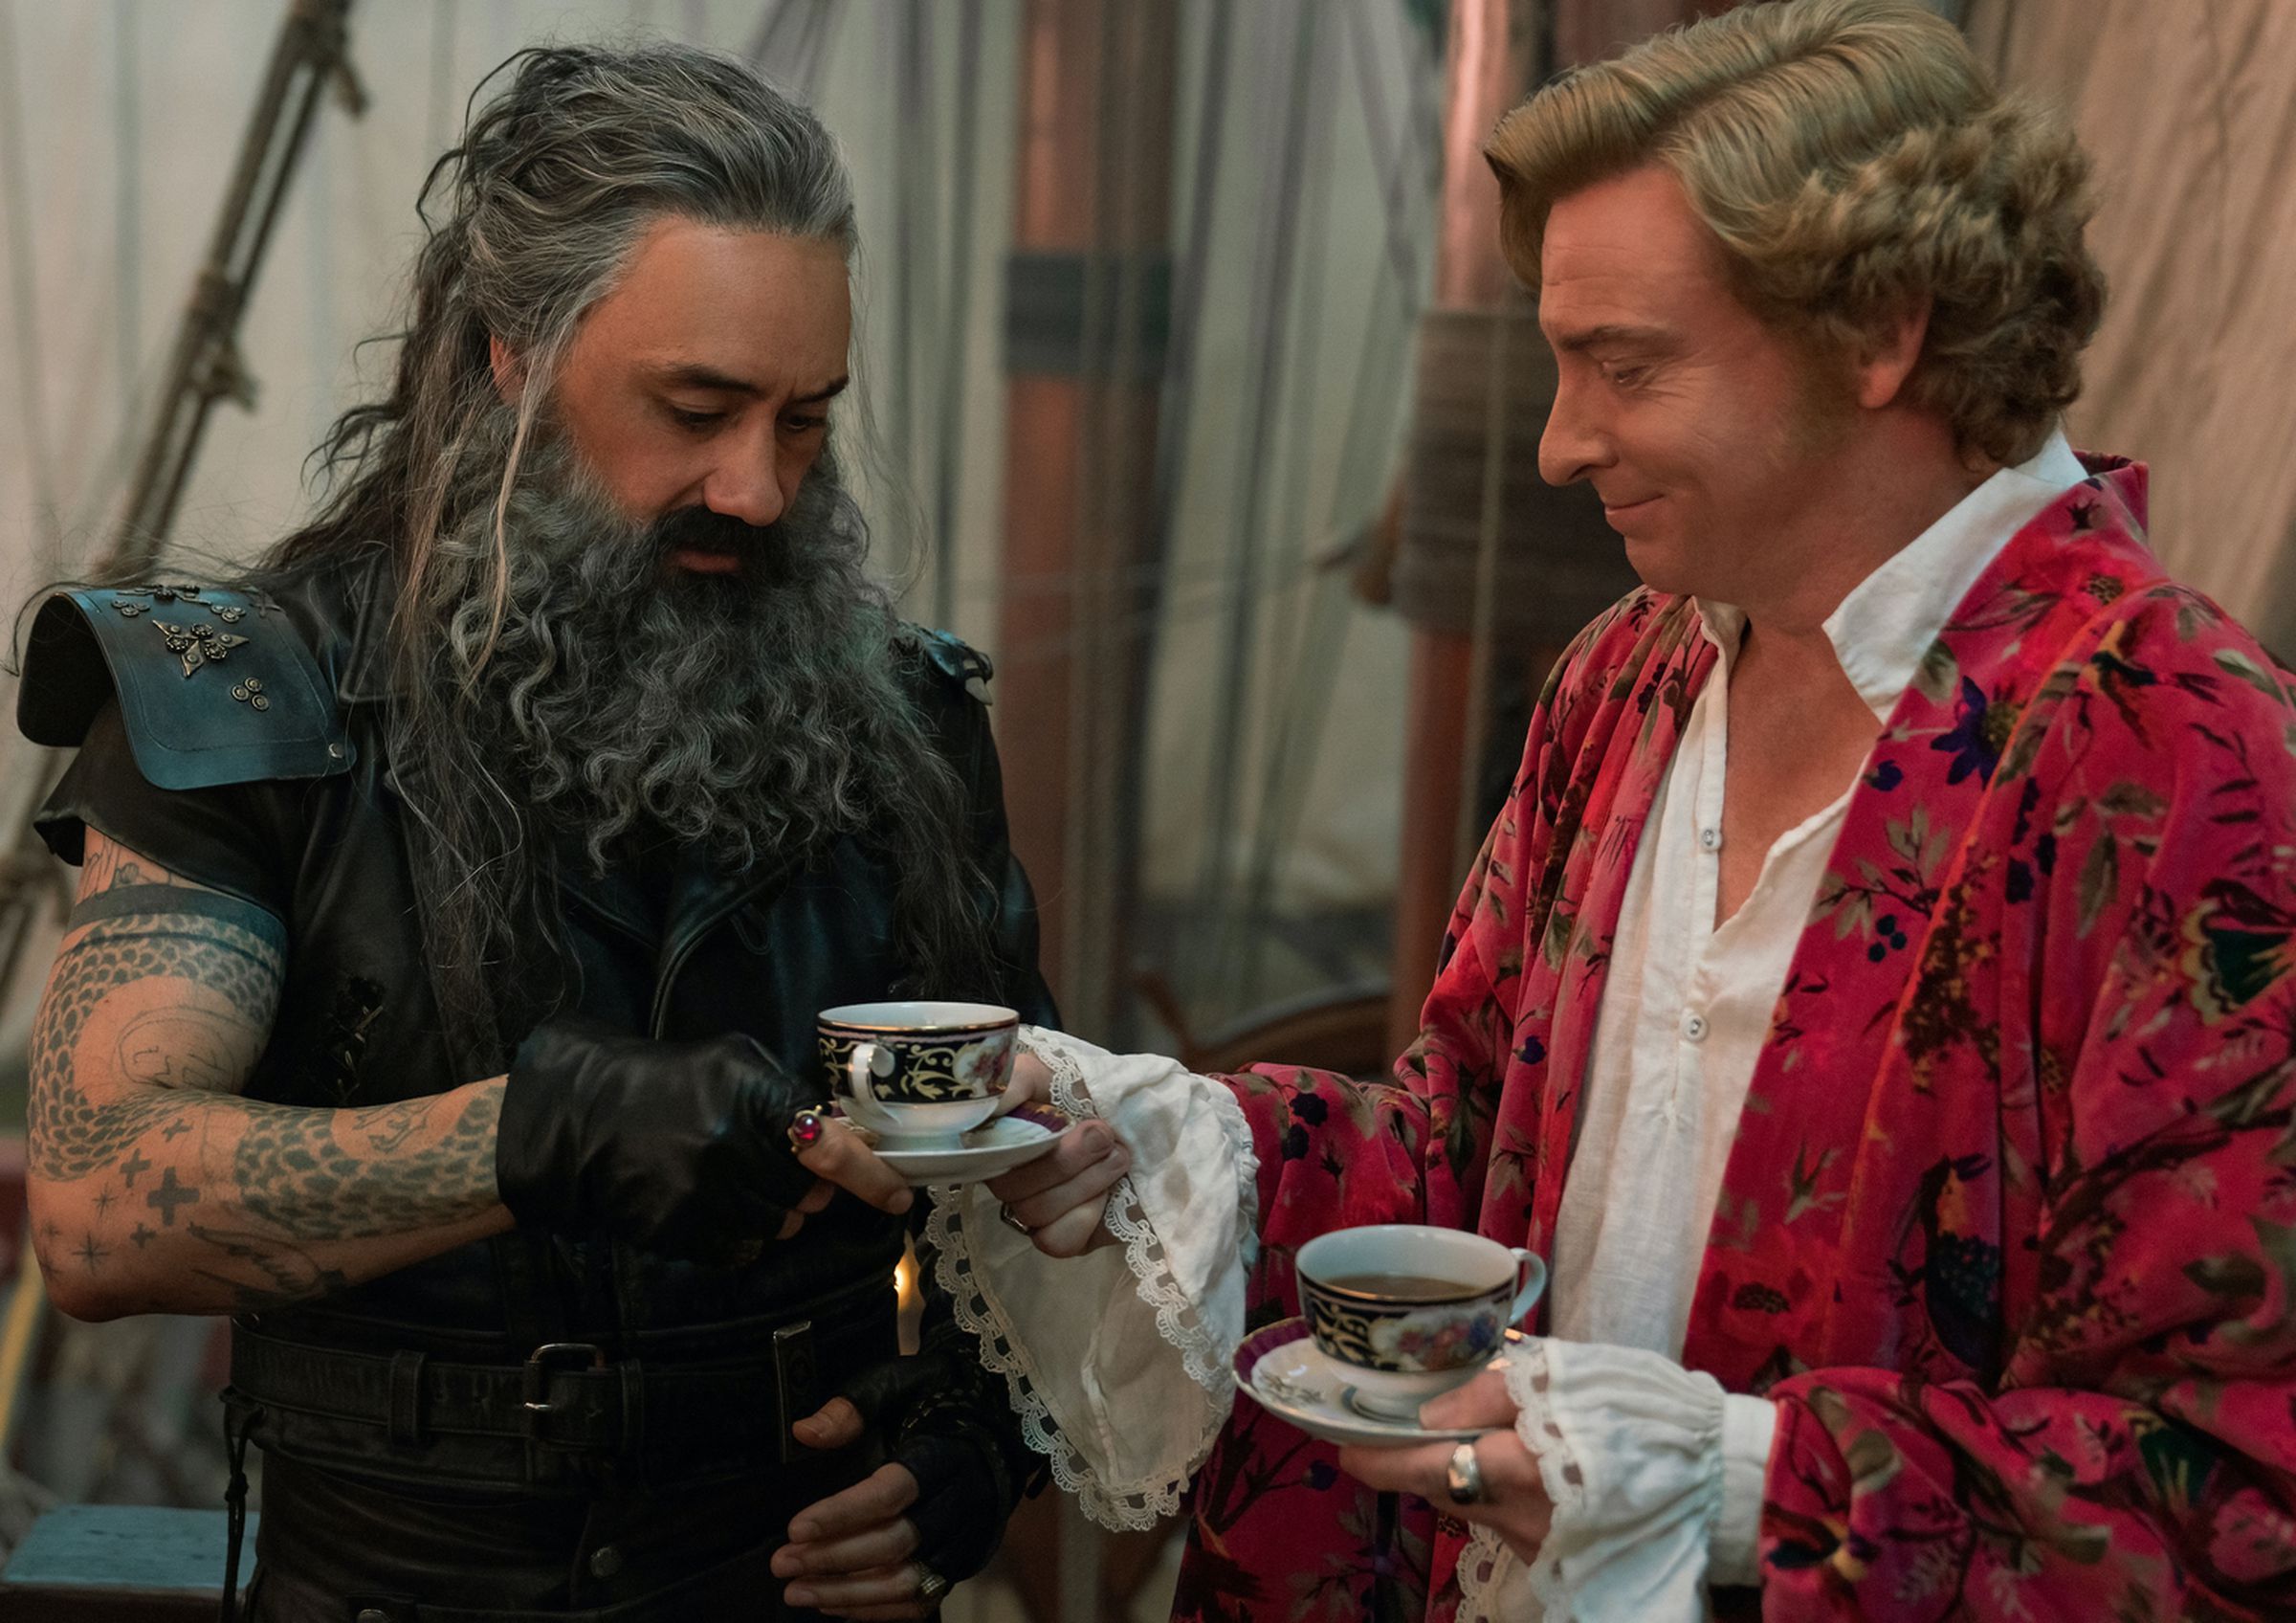 A roughhewn pirate with a massive beard taking a cup of tea from a fey man in a dressing gown and a night coat.